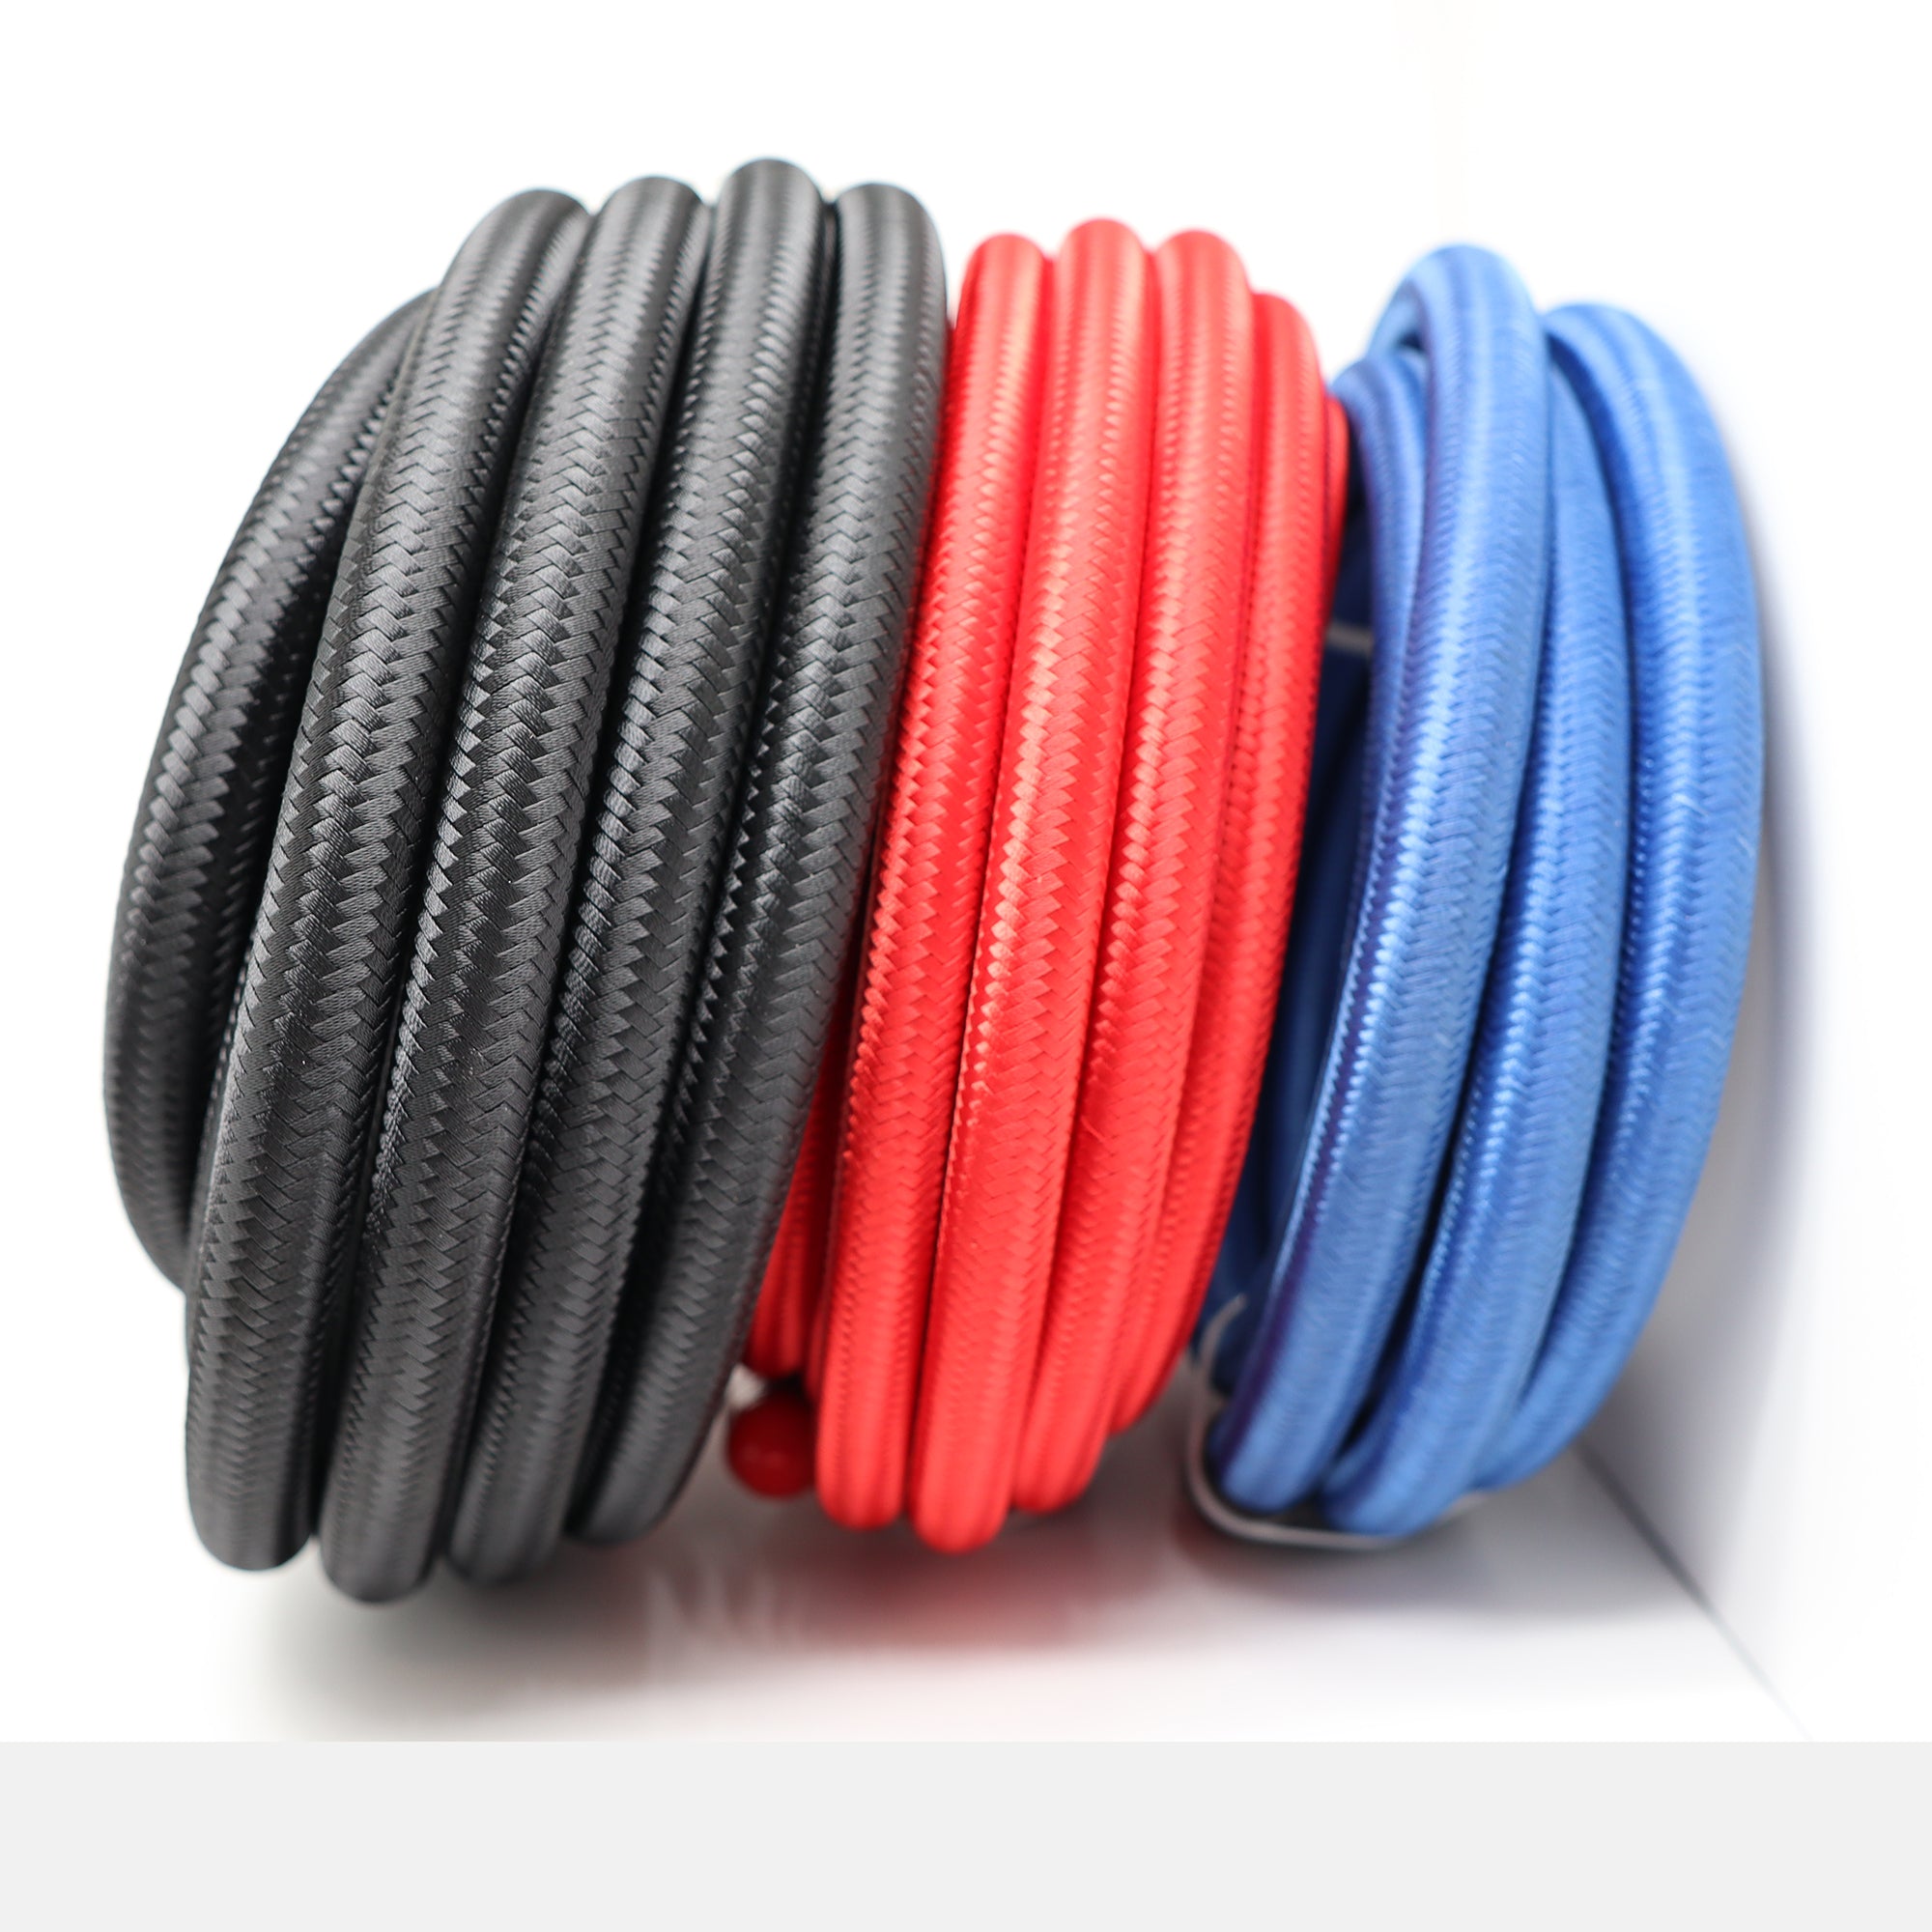 811 PTFE Lined Stainless Steel Braided Racing Hose